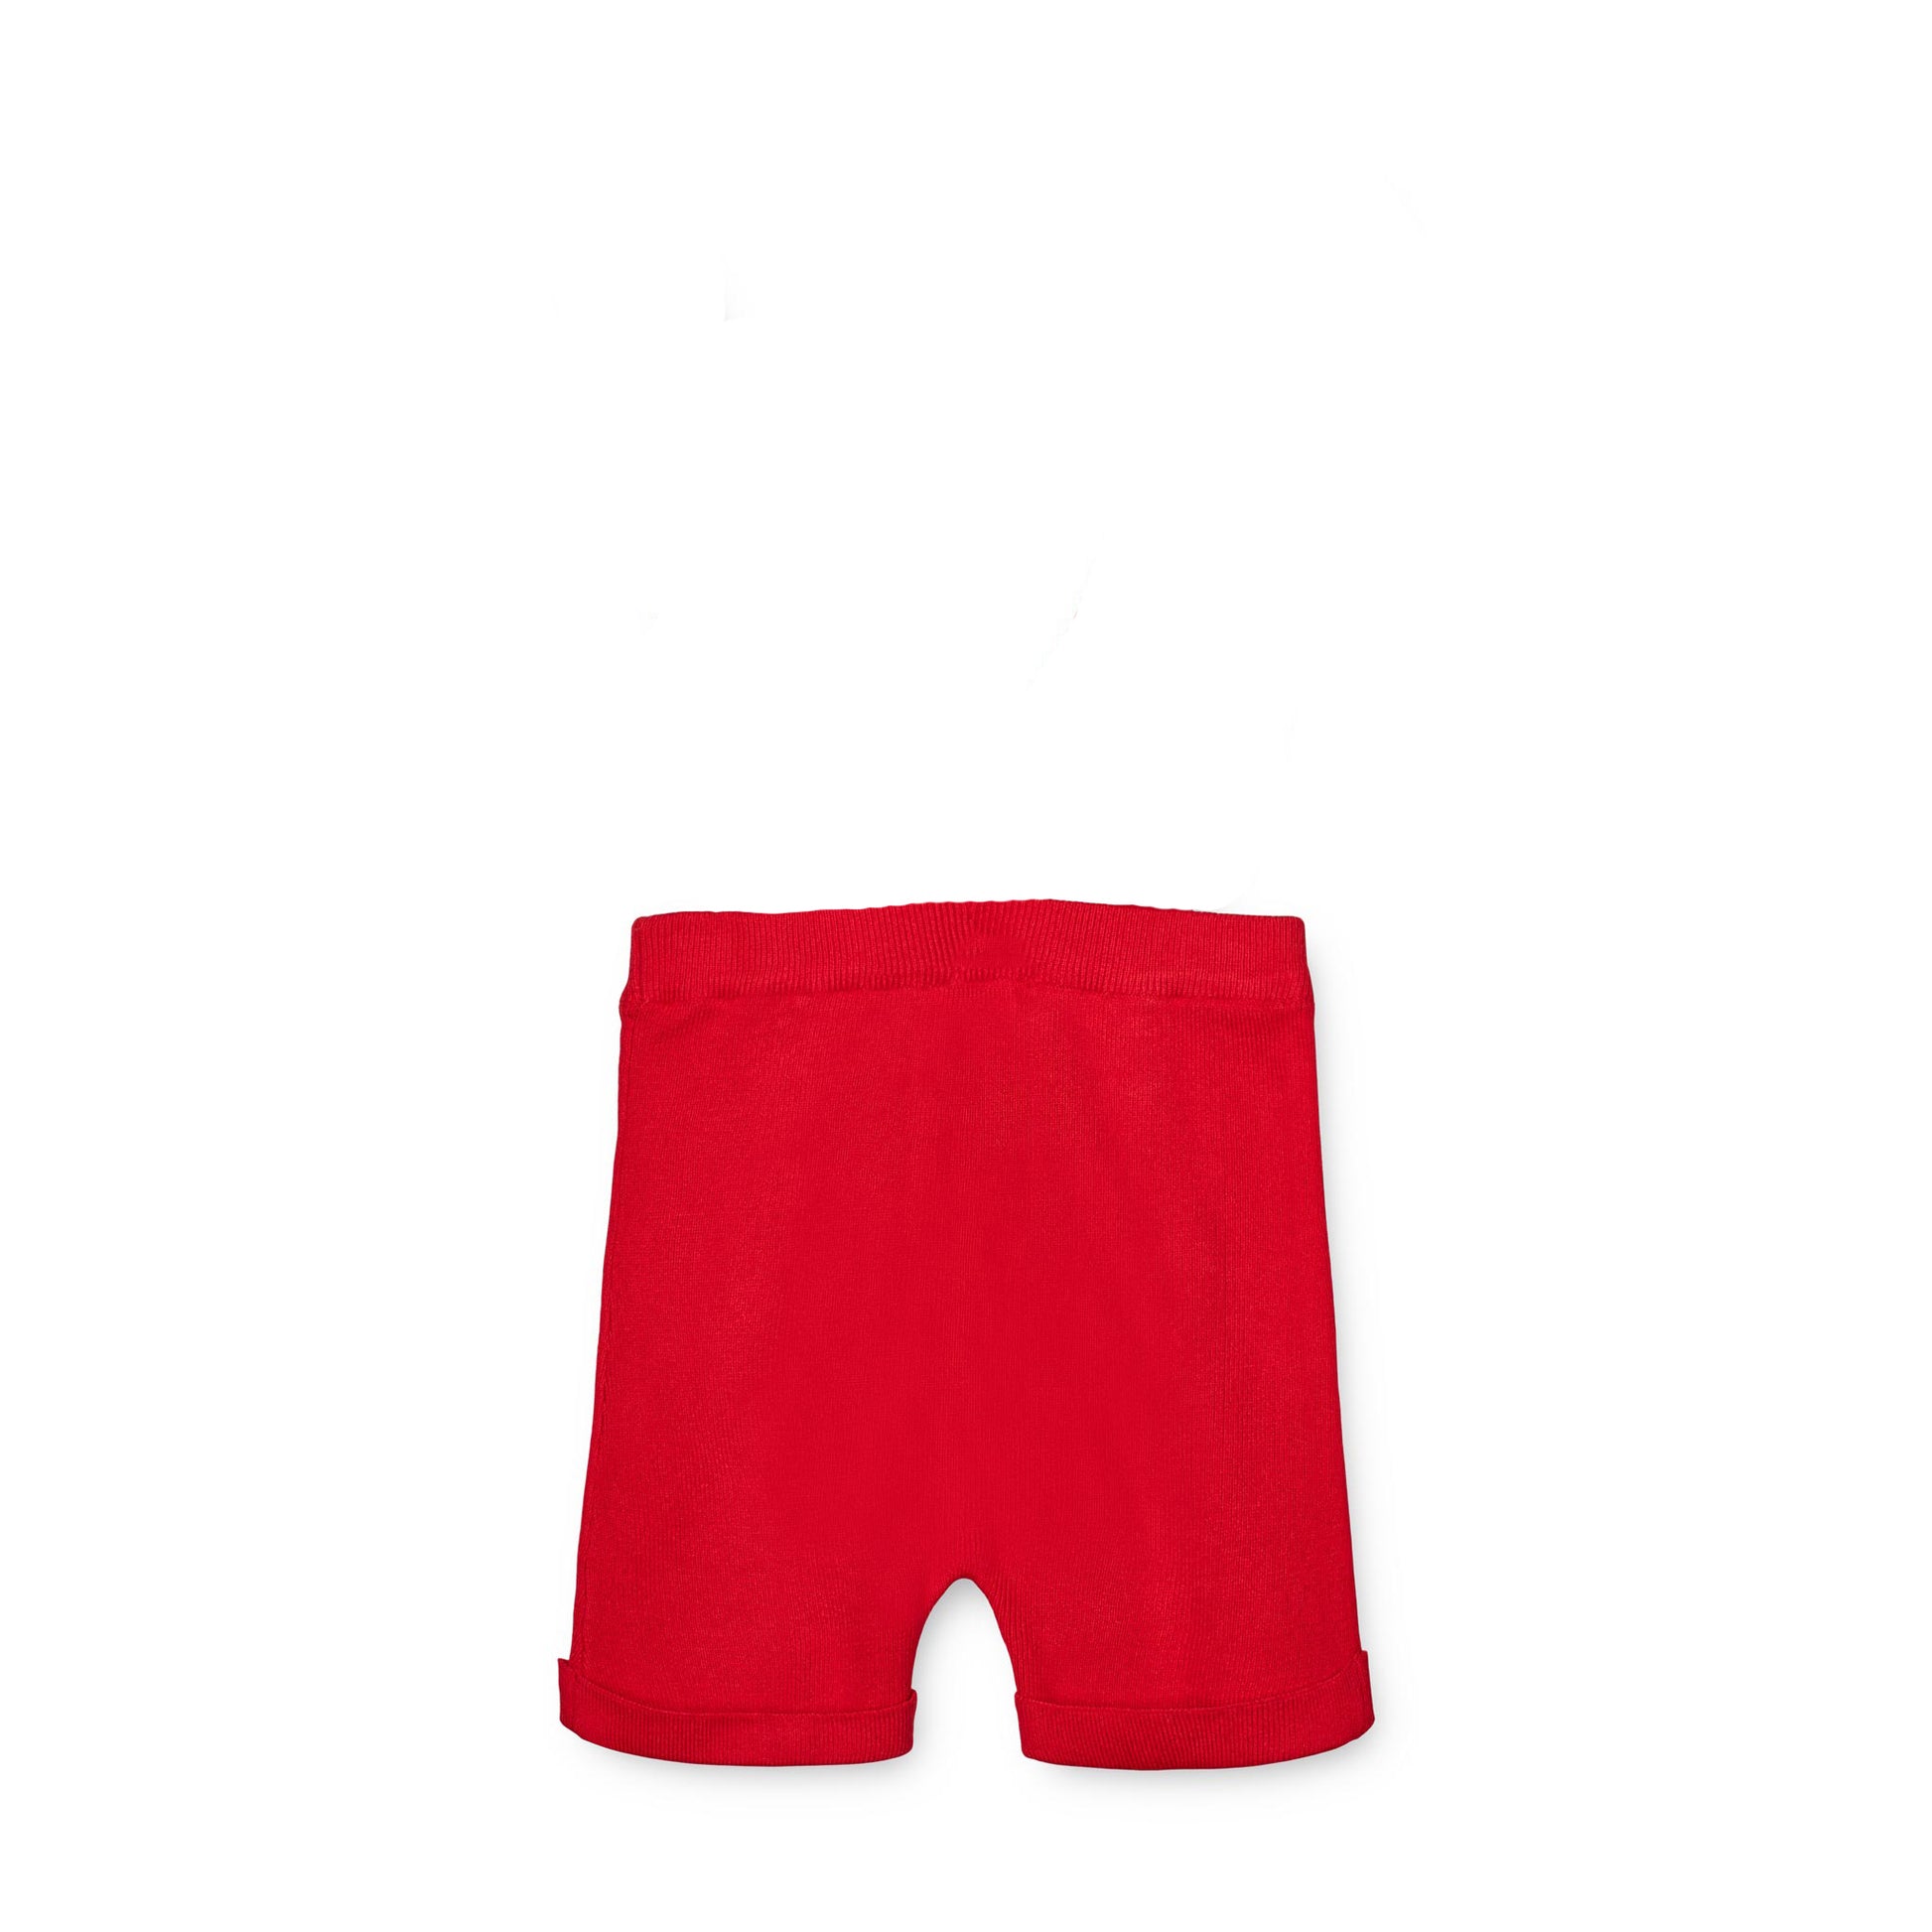 FLIINK FAVO KNIT SHORTS SHORTS HIGH RISK RED